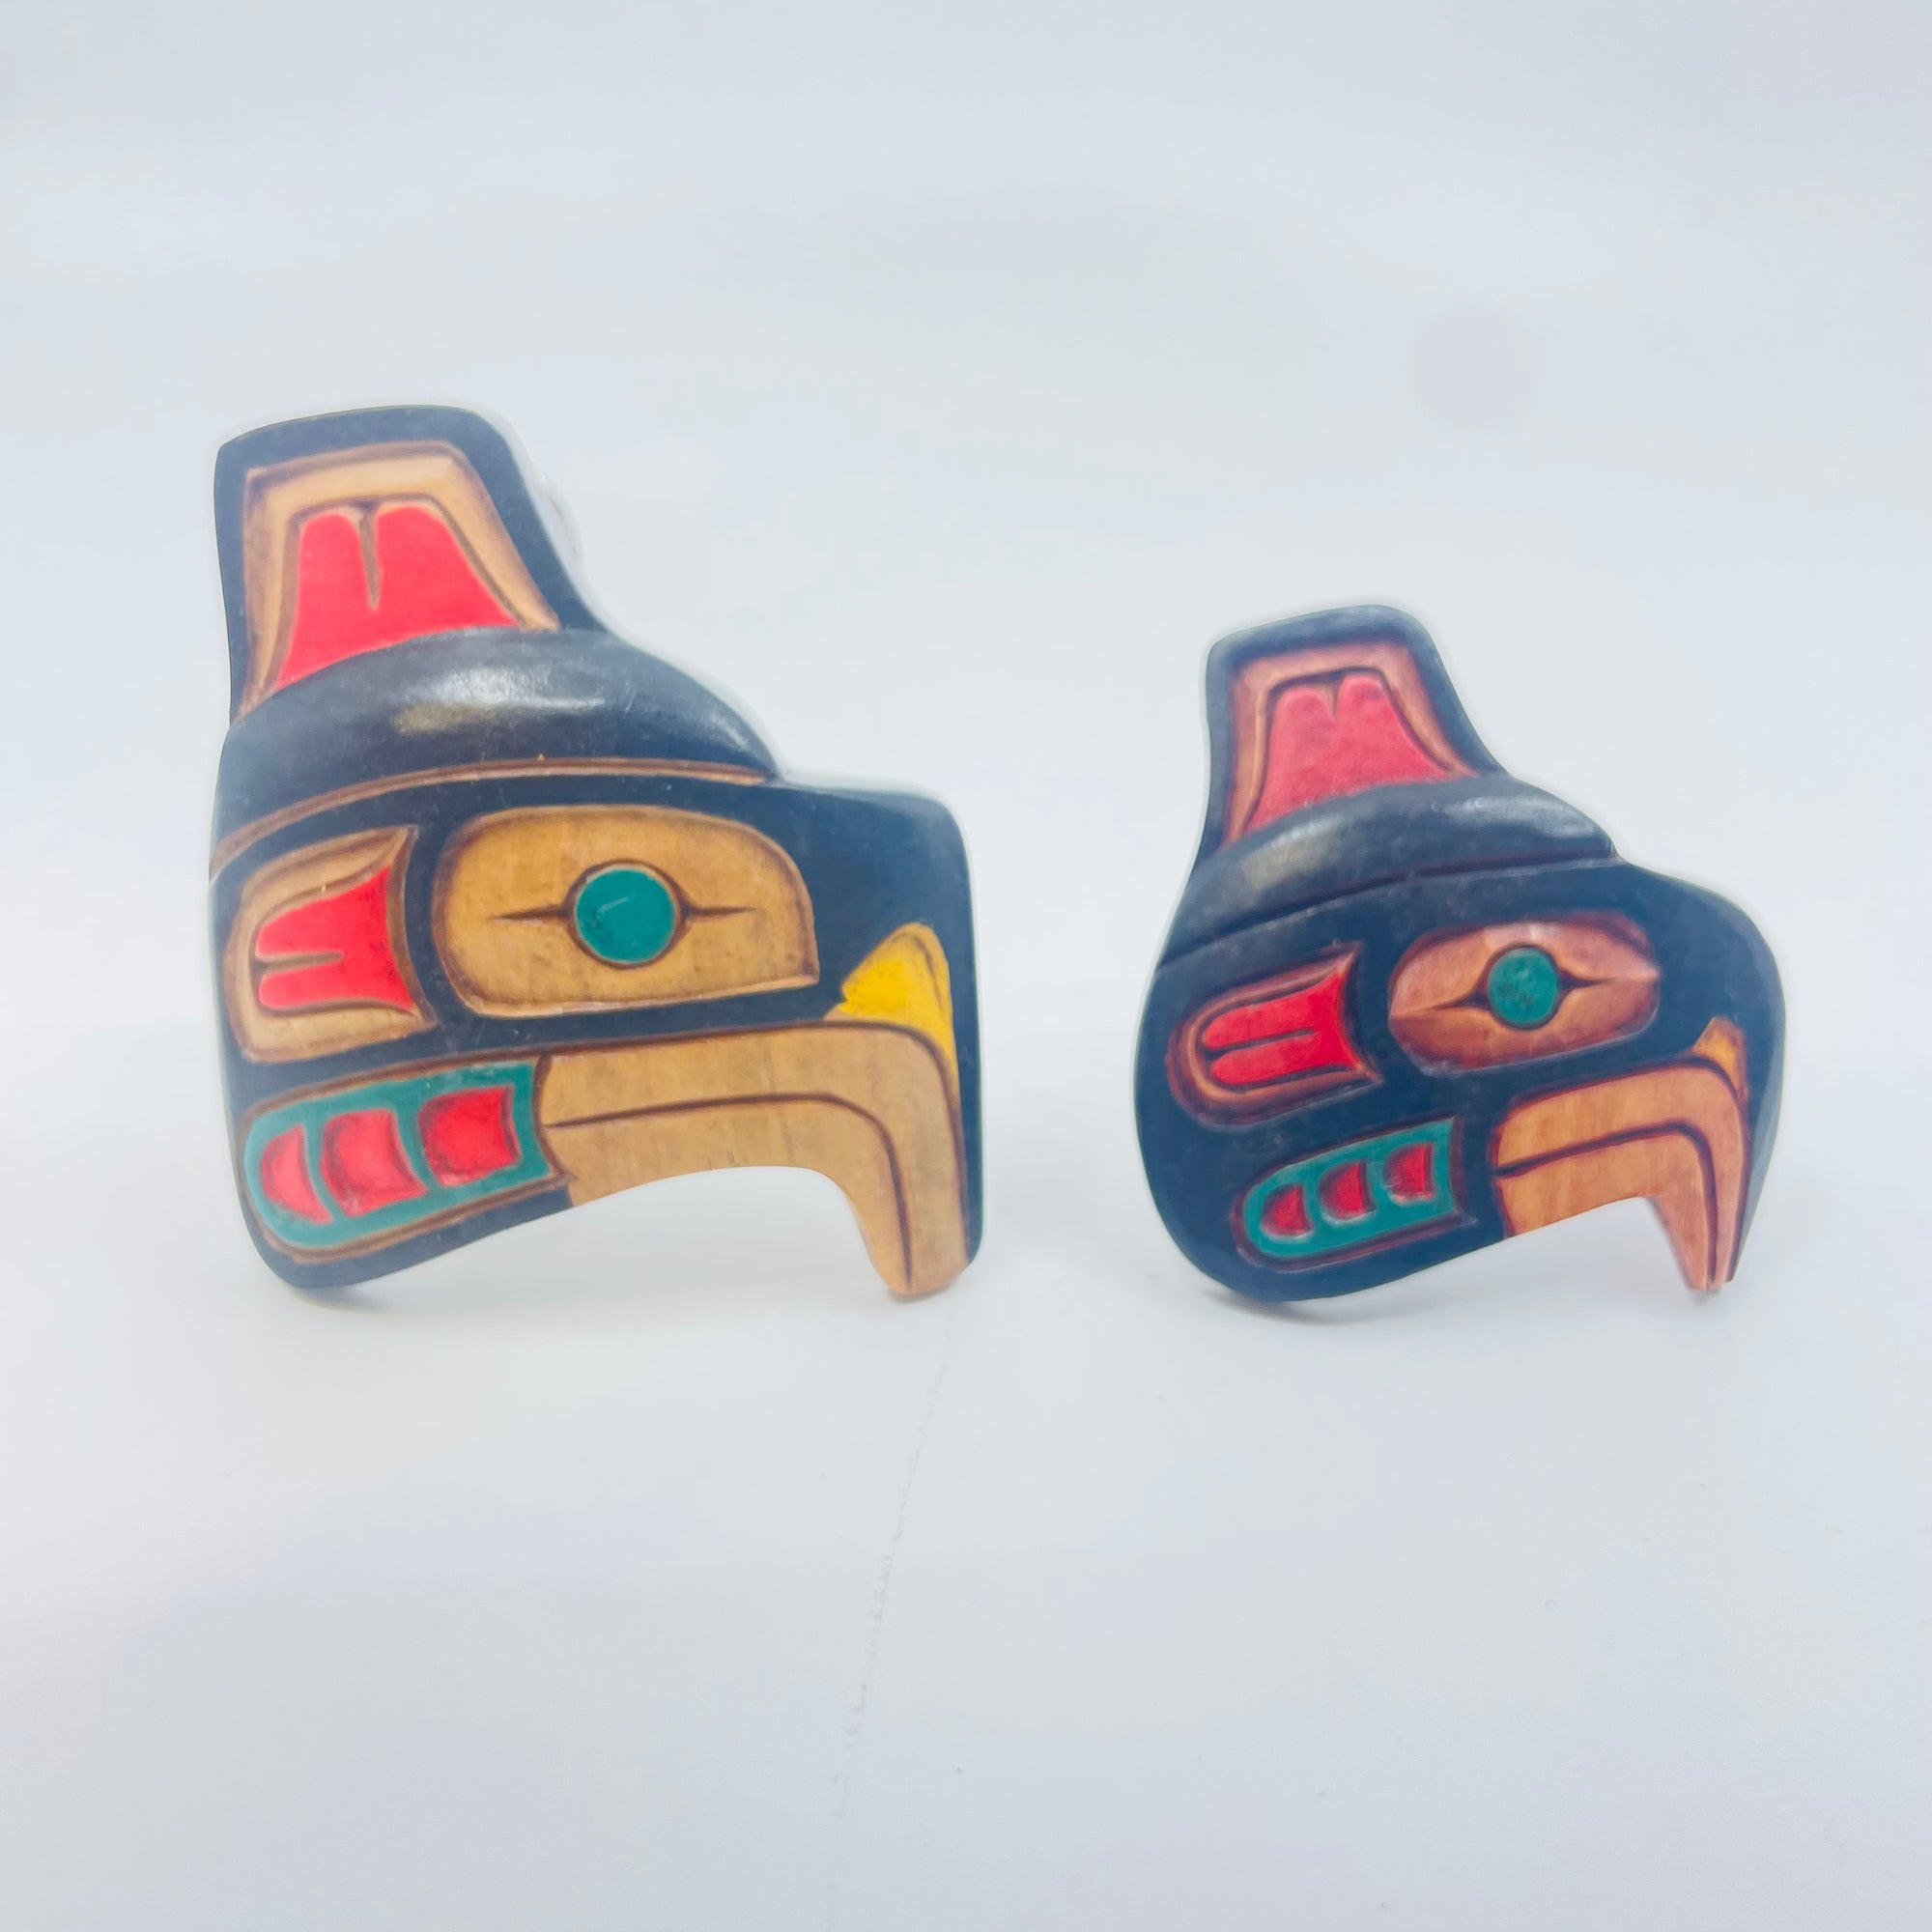 Artie George Magnets - Eagle v1 Small - WM-Magnets-3a - House of Himwitsa Native Art Gallery and Gifts